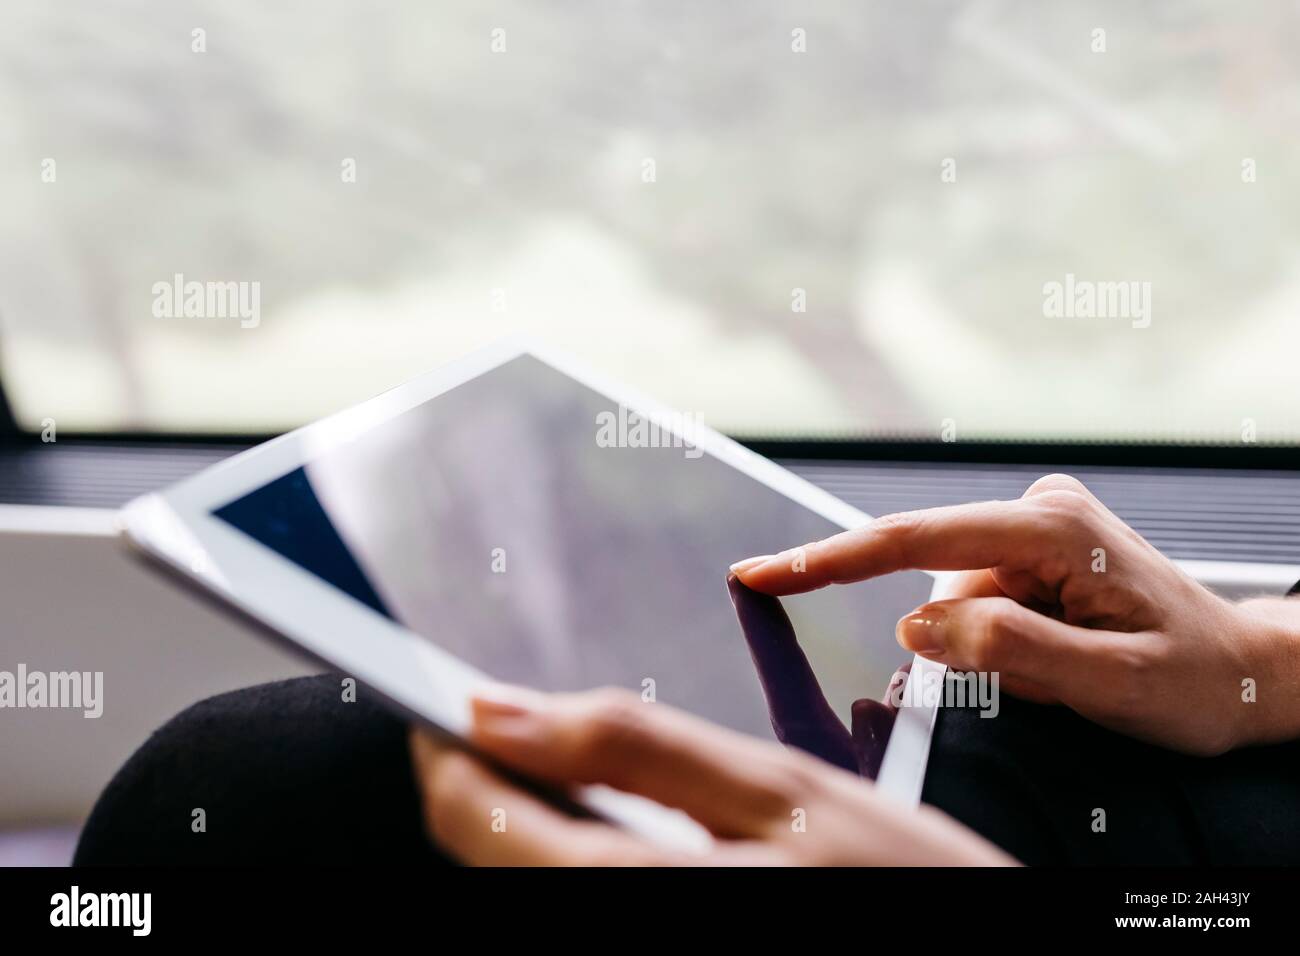 Woman's hand using a tablet while traveling by train Stock Photo